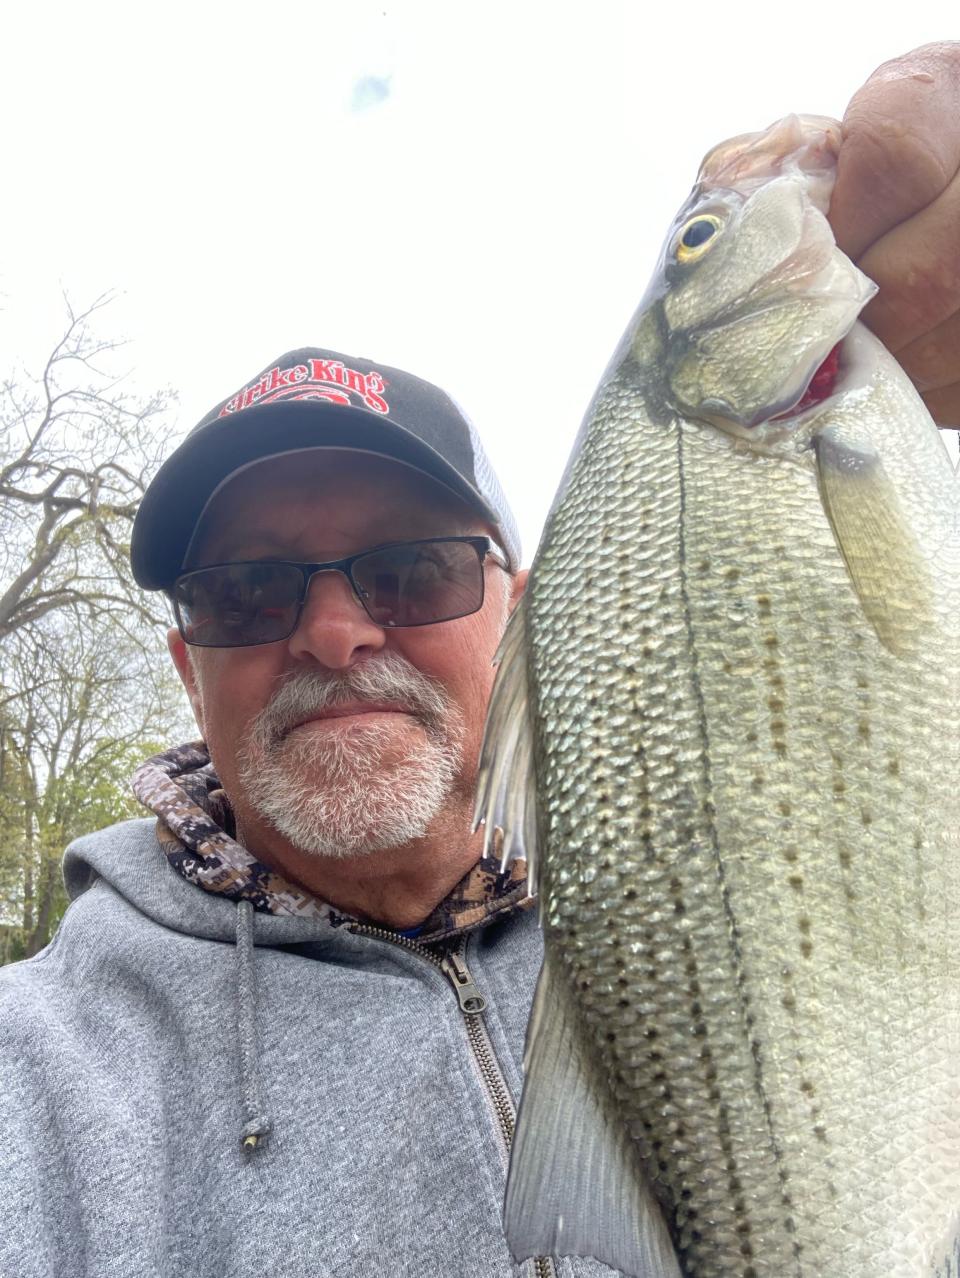 White bass are easy to catch on flashy baits, such as inline spinners or brightly colored jigs and twister tails. They’ll also hit minnows under a bobber.